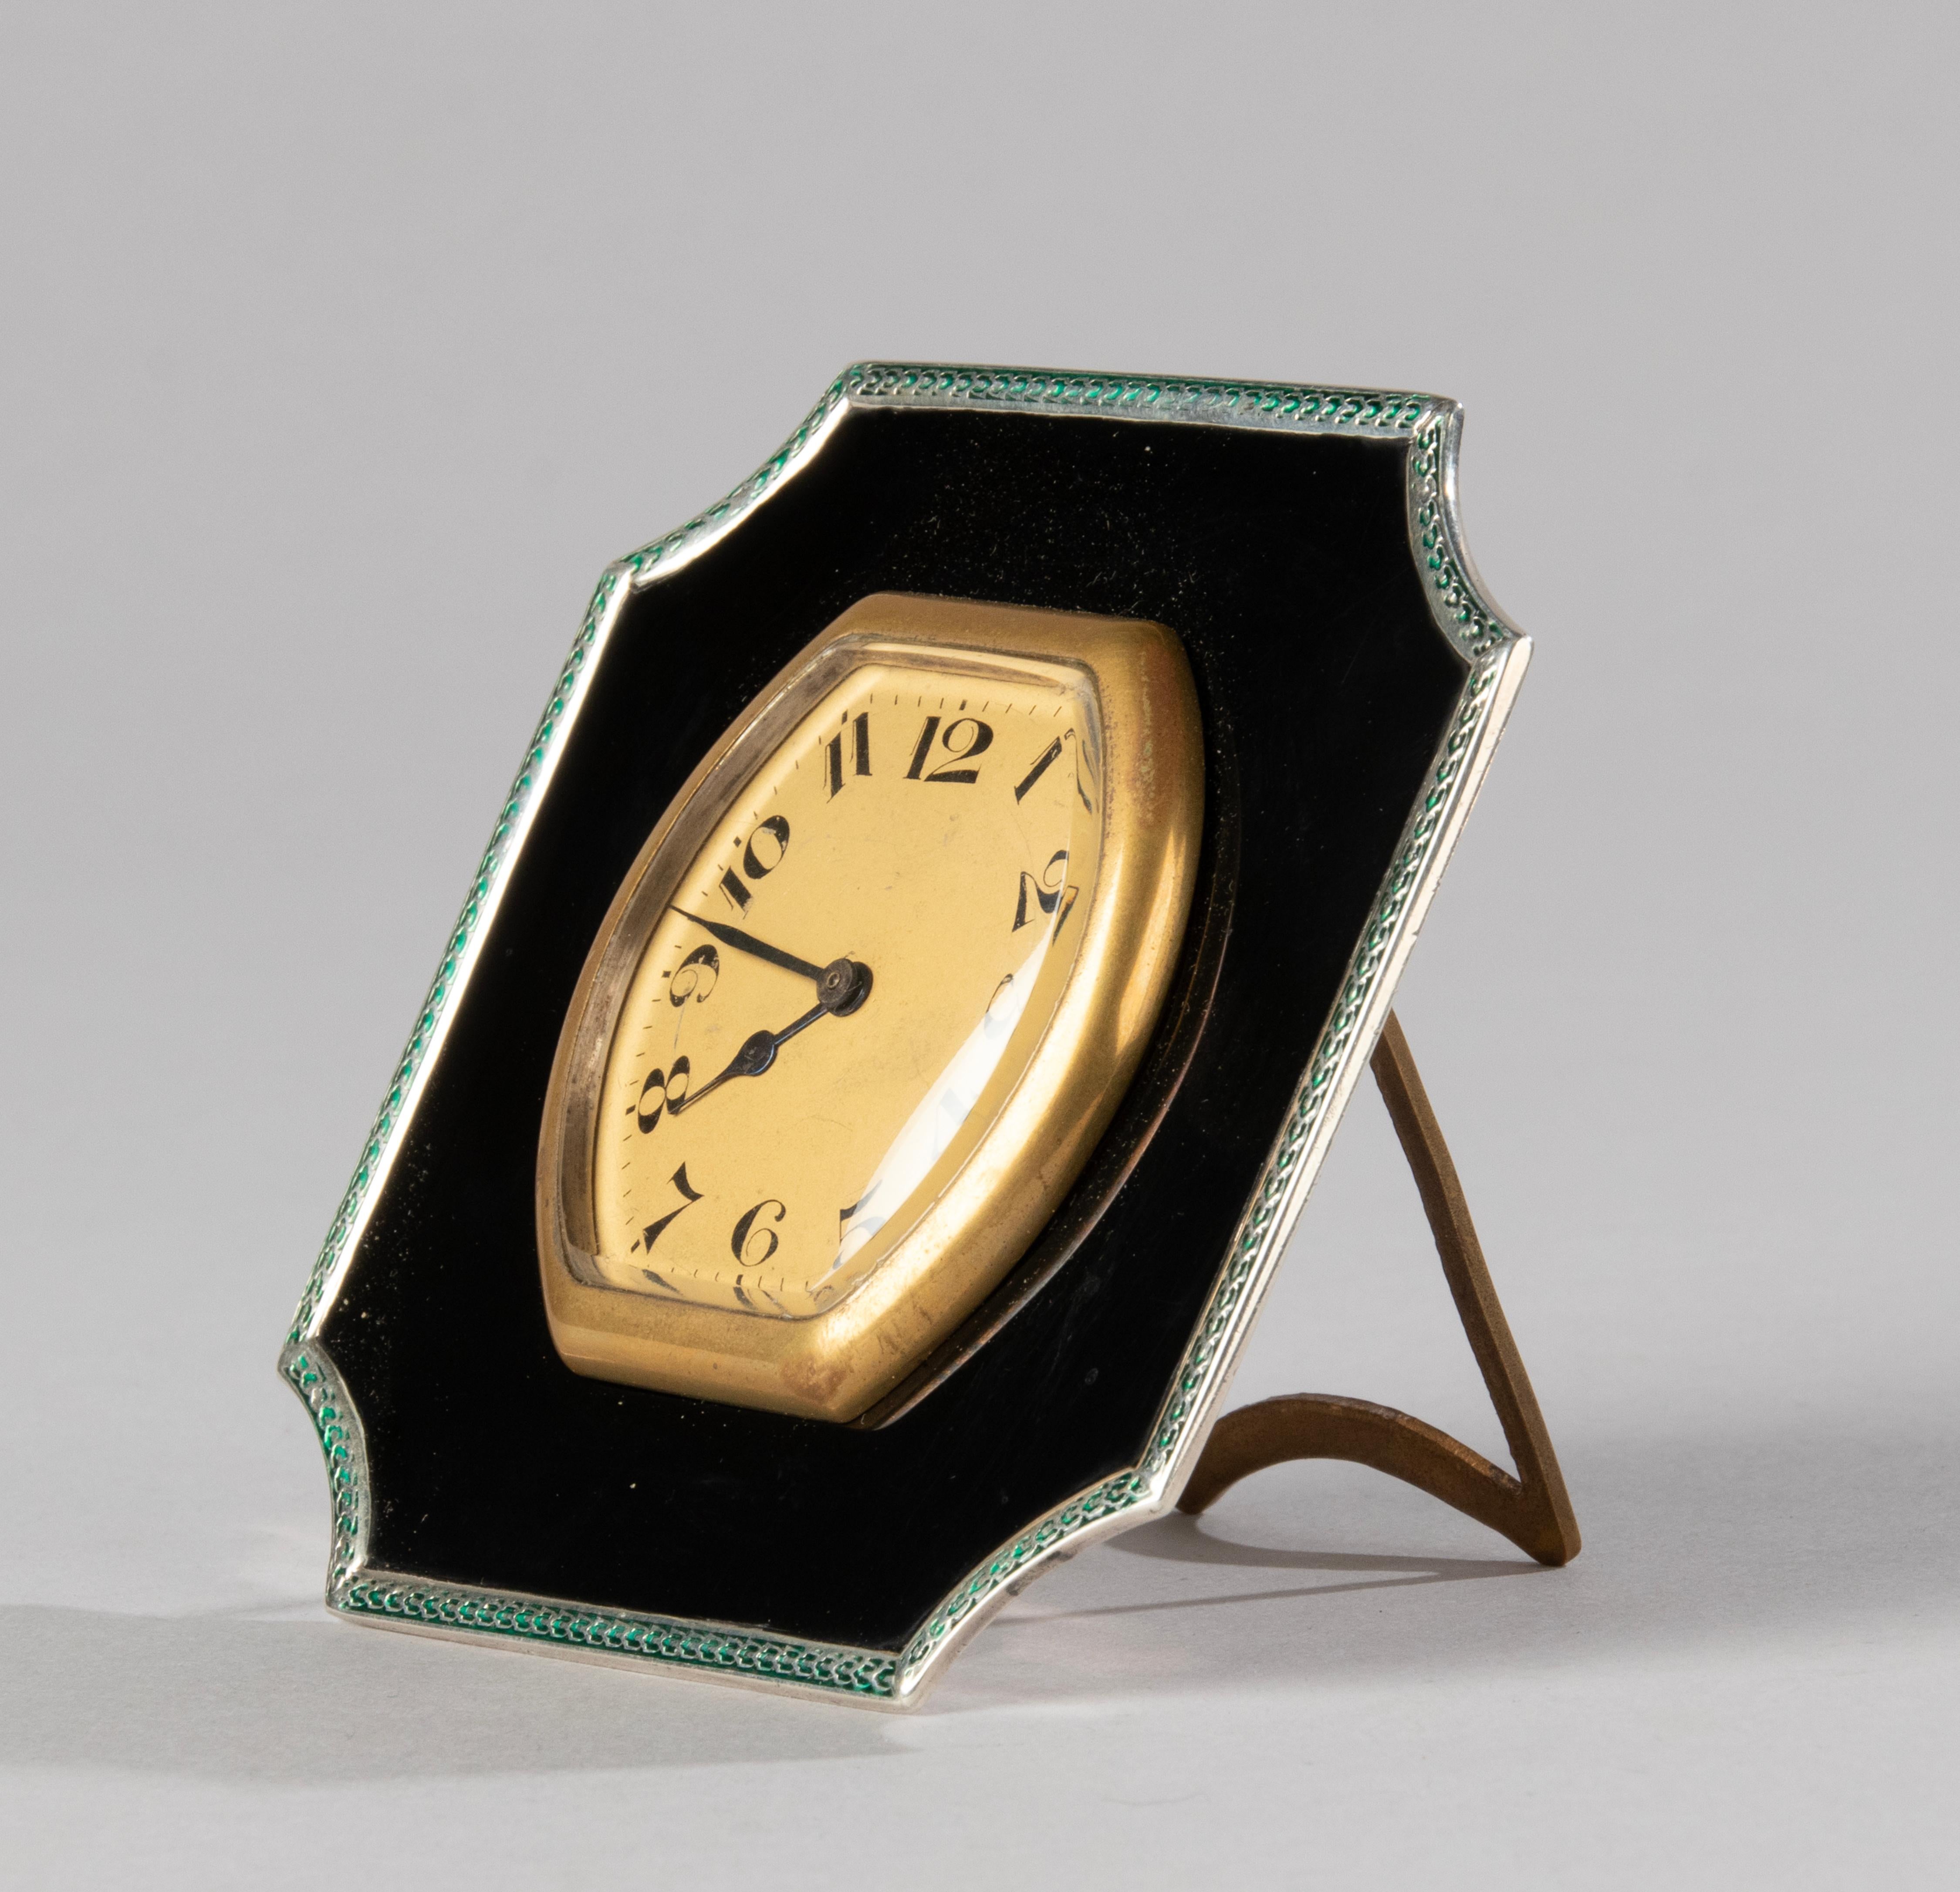 A lovely Art Deco table clock, made by the Birmingham silversmith Deakin and Francis, in 1928. 
The clockwork is of Swiss origin. The silver frame is very decorative with beautiful enamel work in green and black. The clock has a good mechanism, it